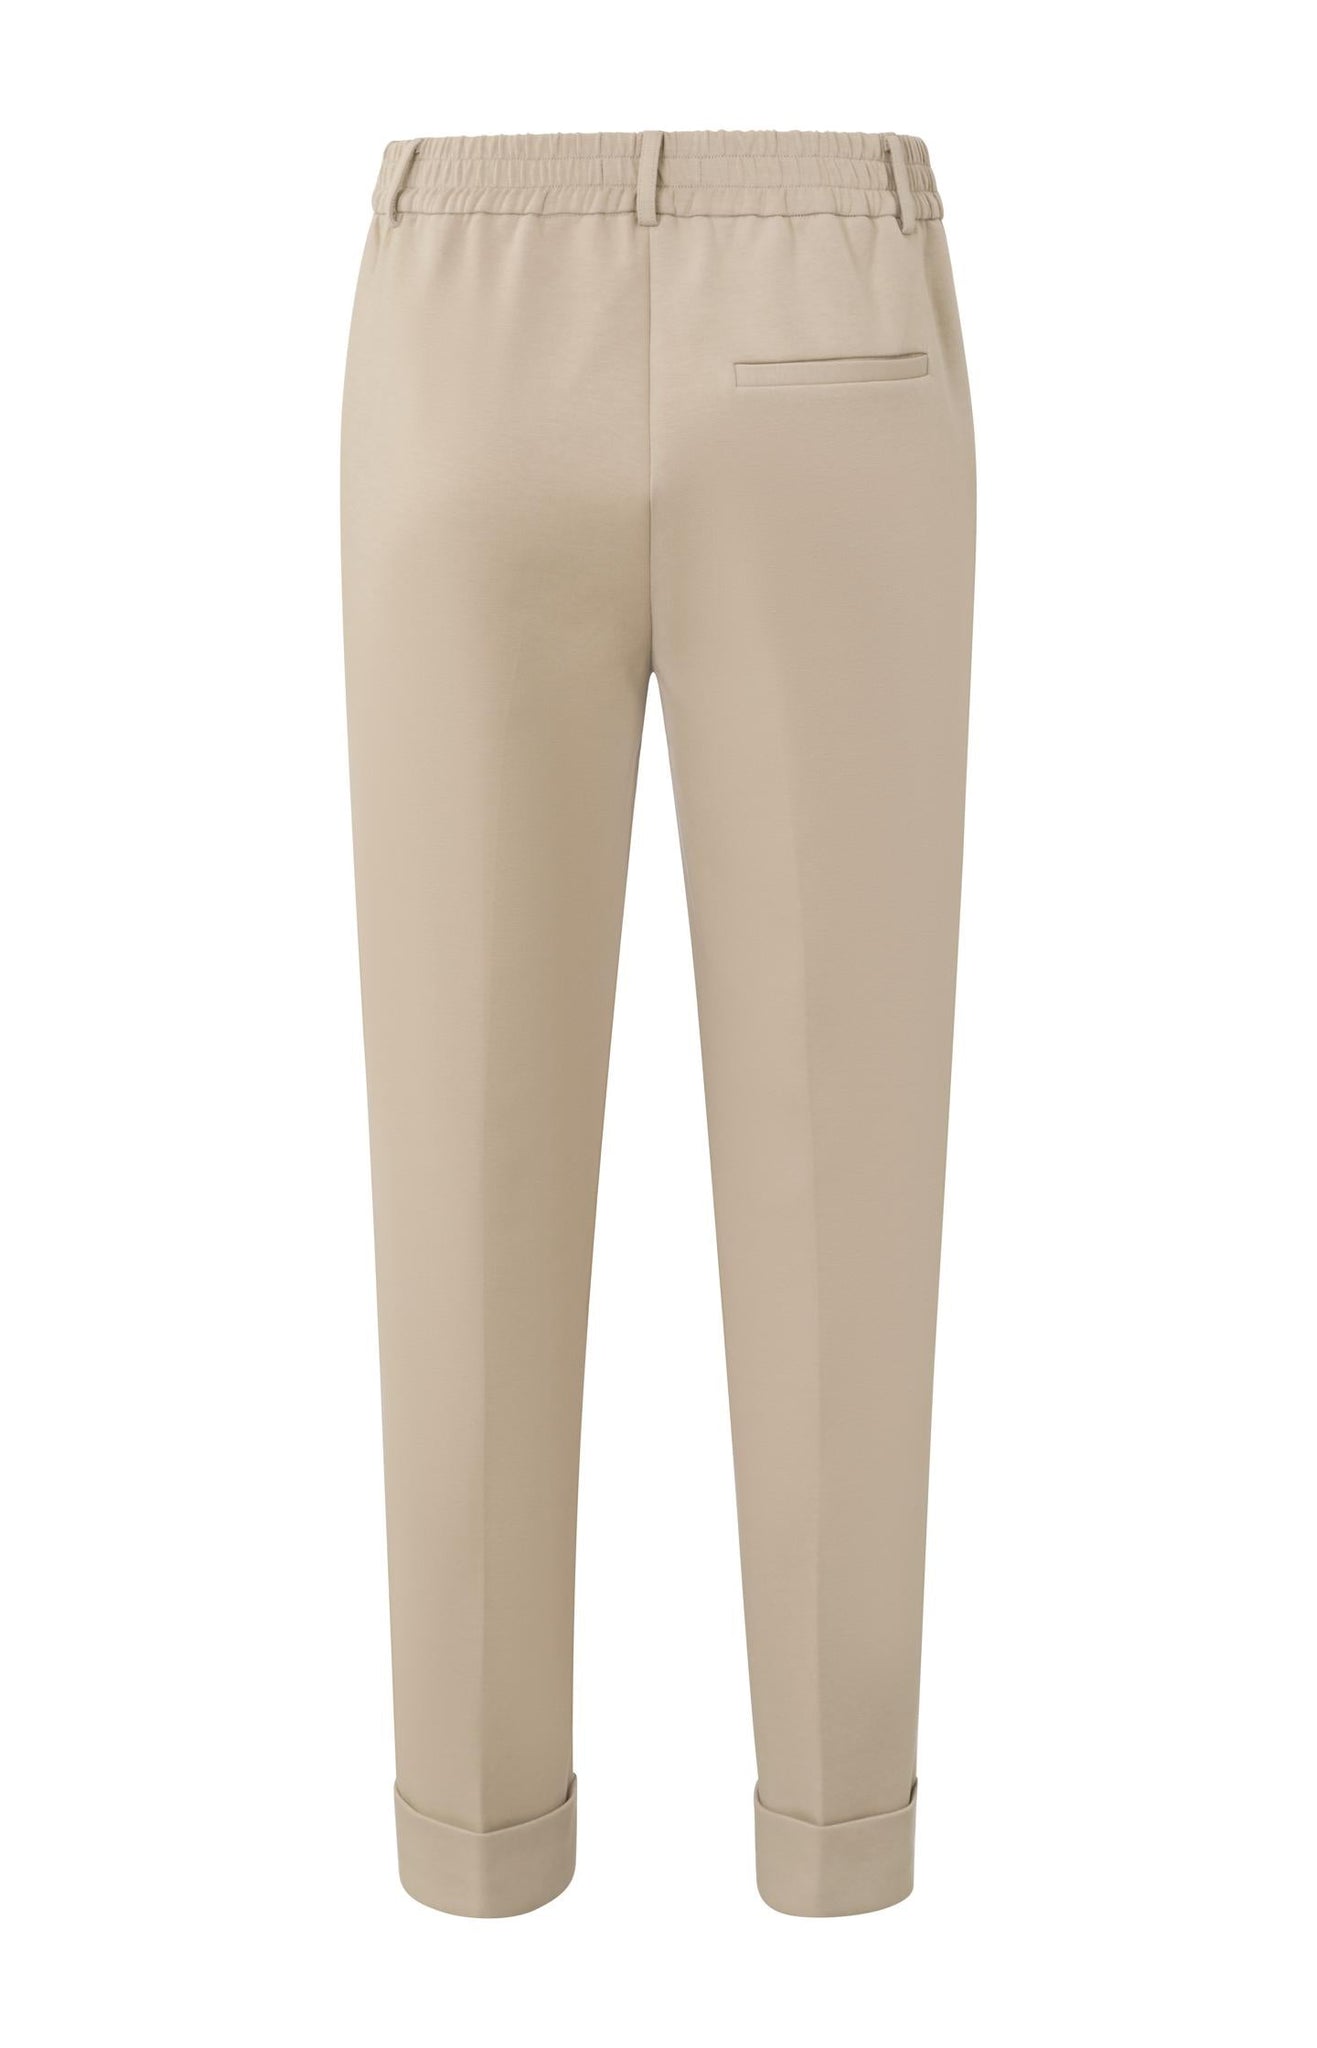 Jersey turn up trousers (taupe)